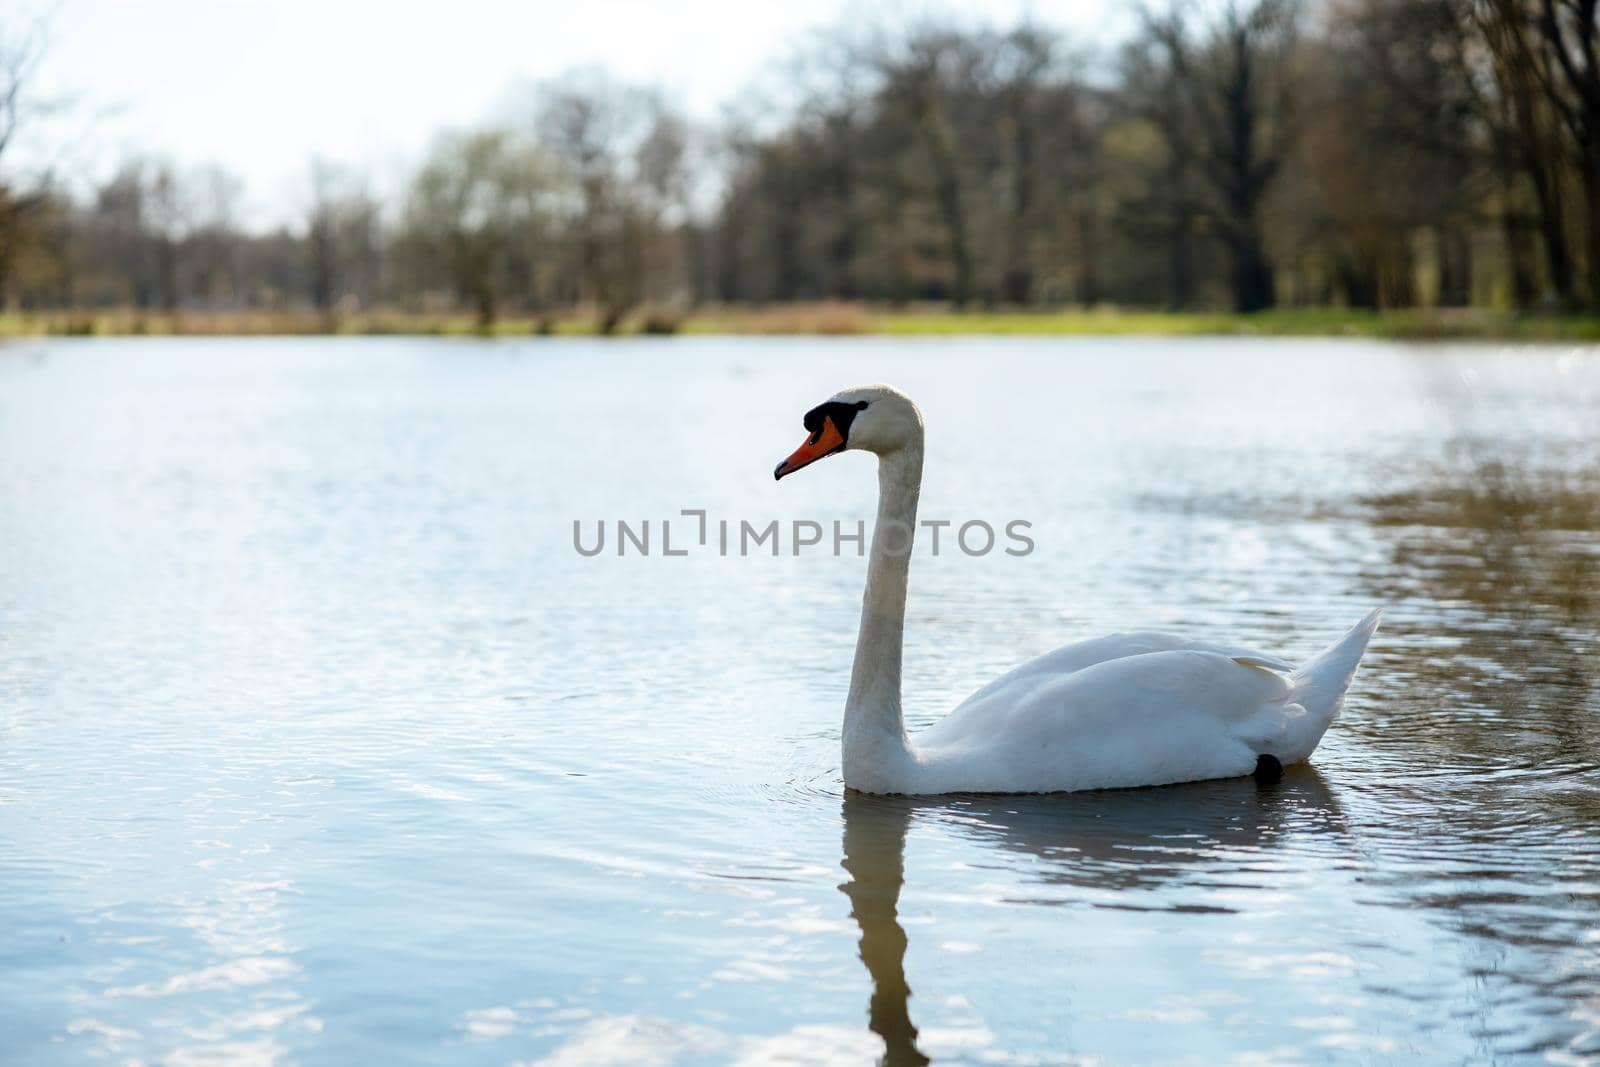 White swan in the wild. A beautiful swan swimming in the lake. Blue water, sunny weather, beauty of the nature. Cygnus olor. Close-up view